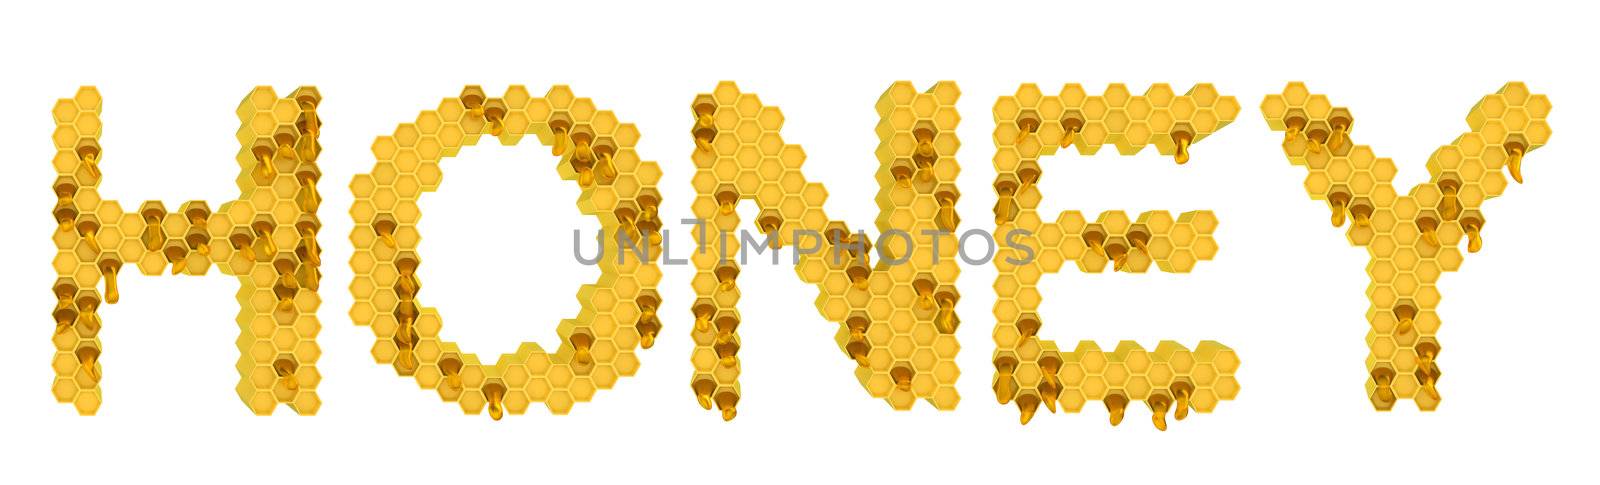 Honey and sweet food: yellow honeycomb letters over white